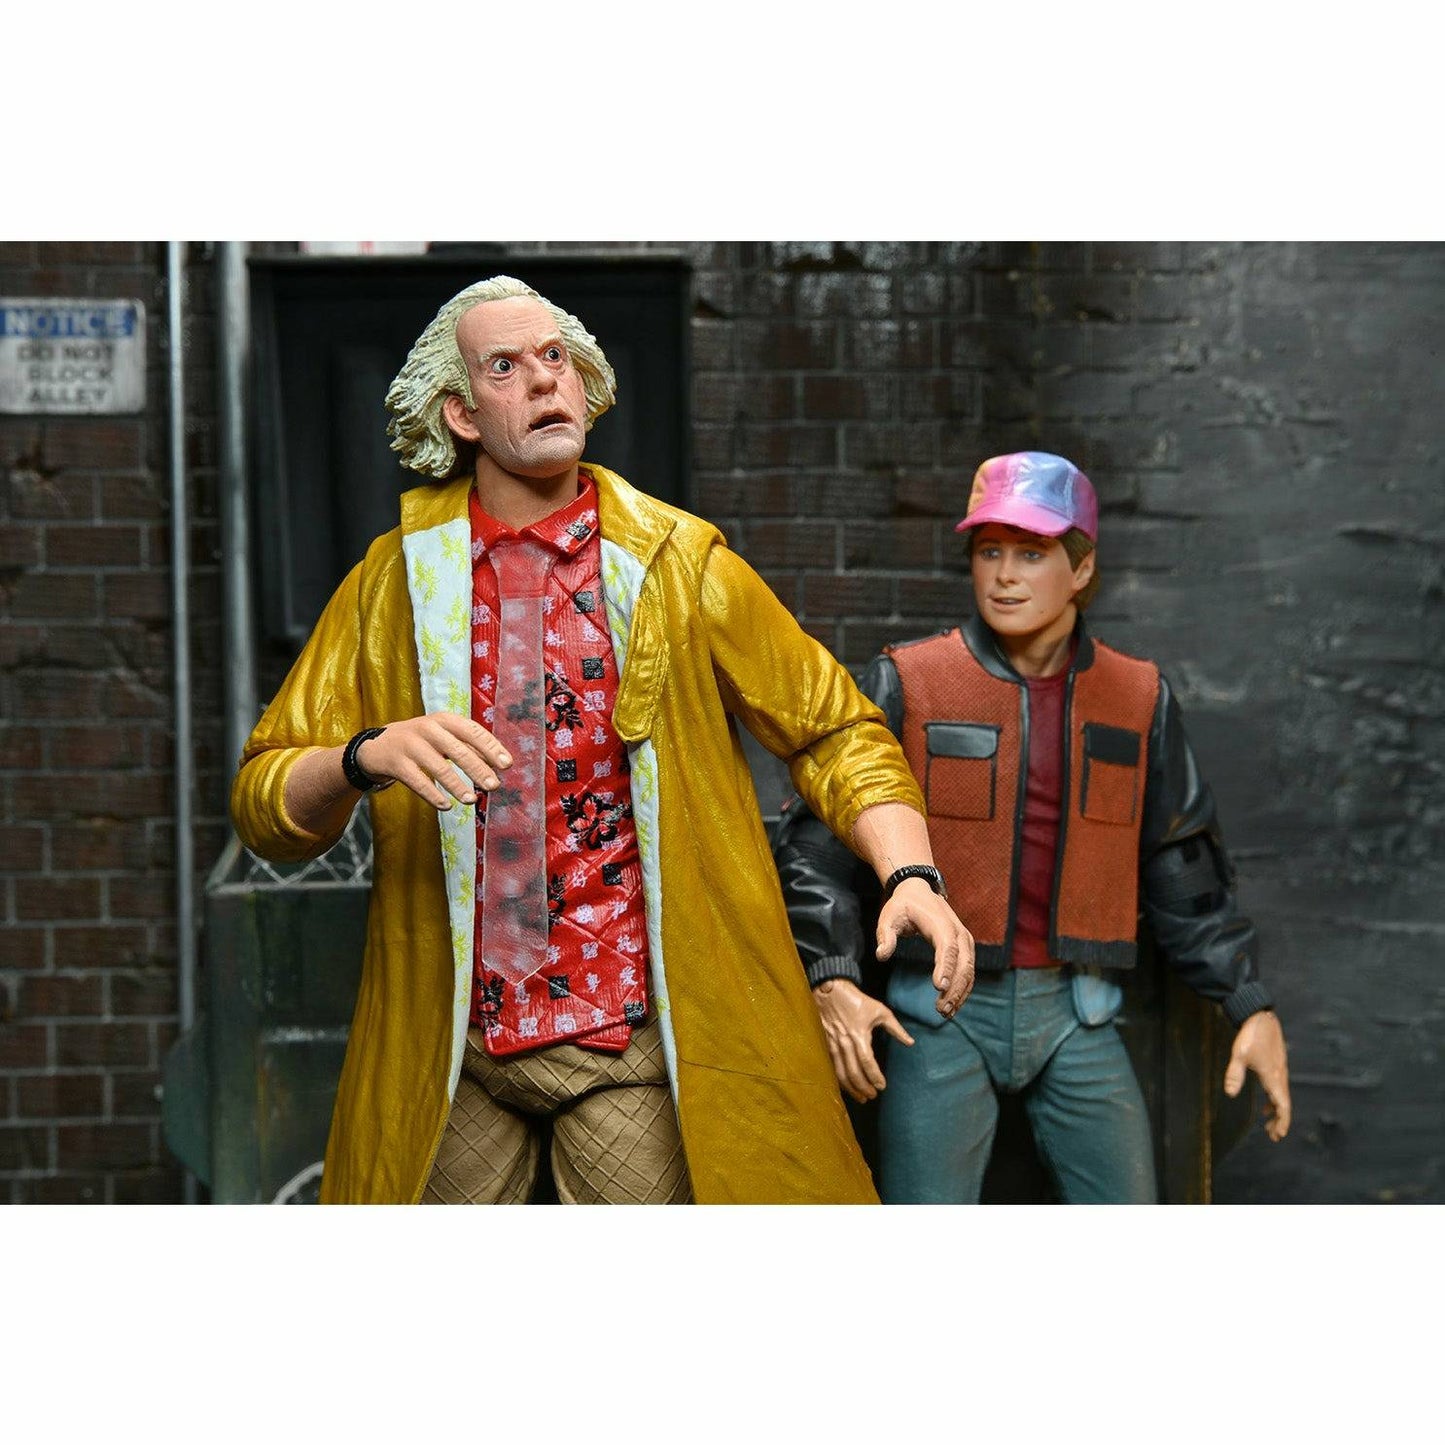 NECA Back to the Future Part II 7" Scale Action Figure - Ultimate Marty McFly (2015) Action Figure NECA